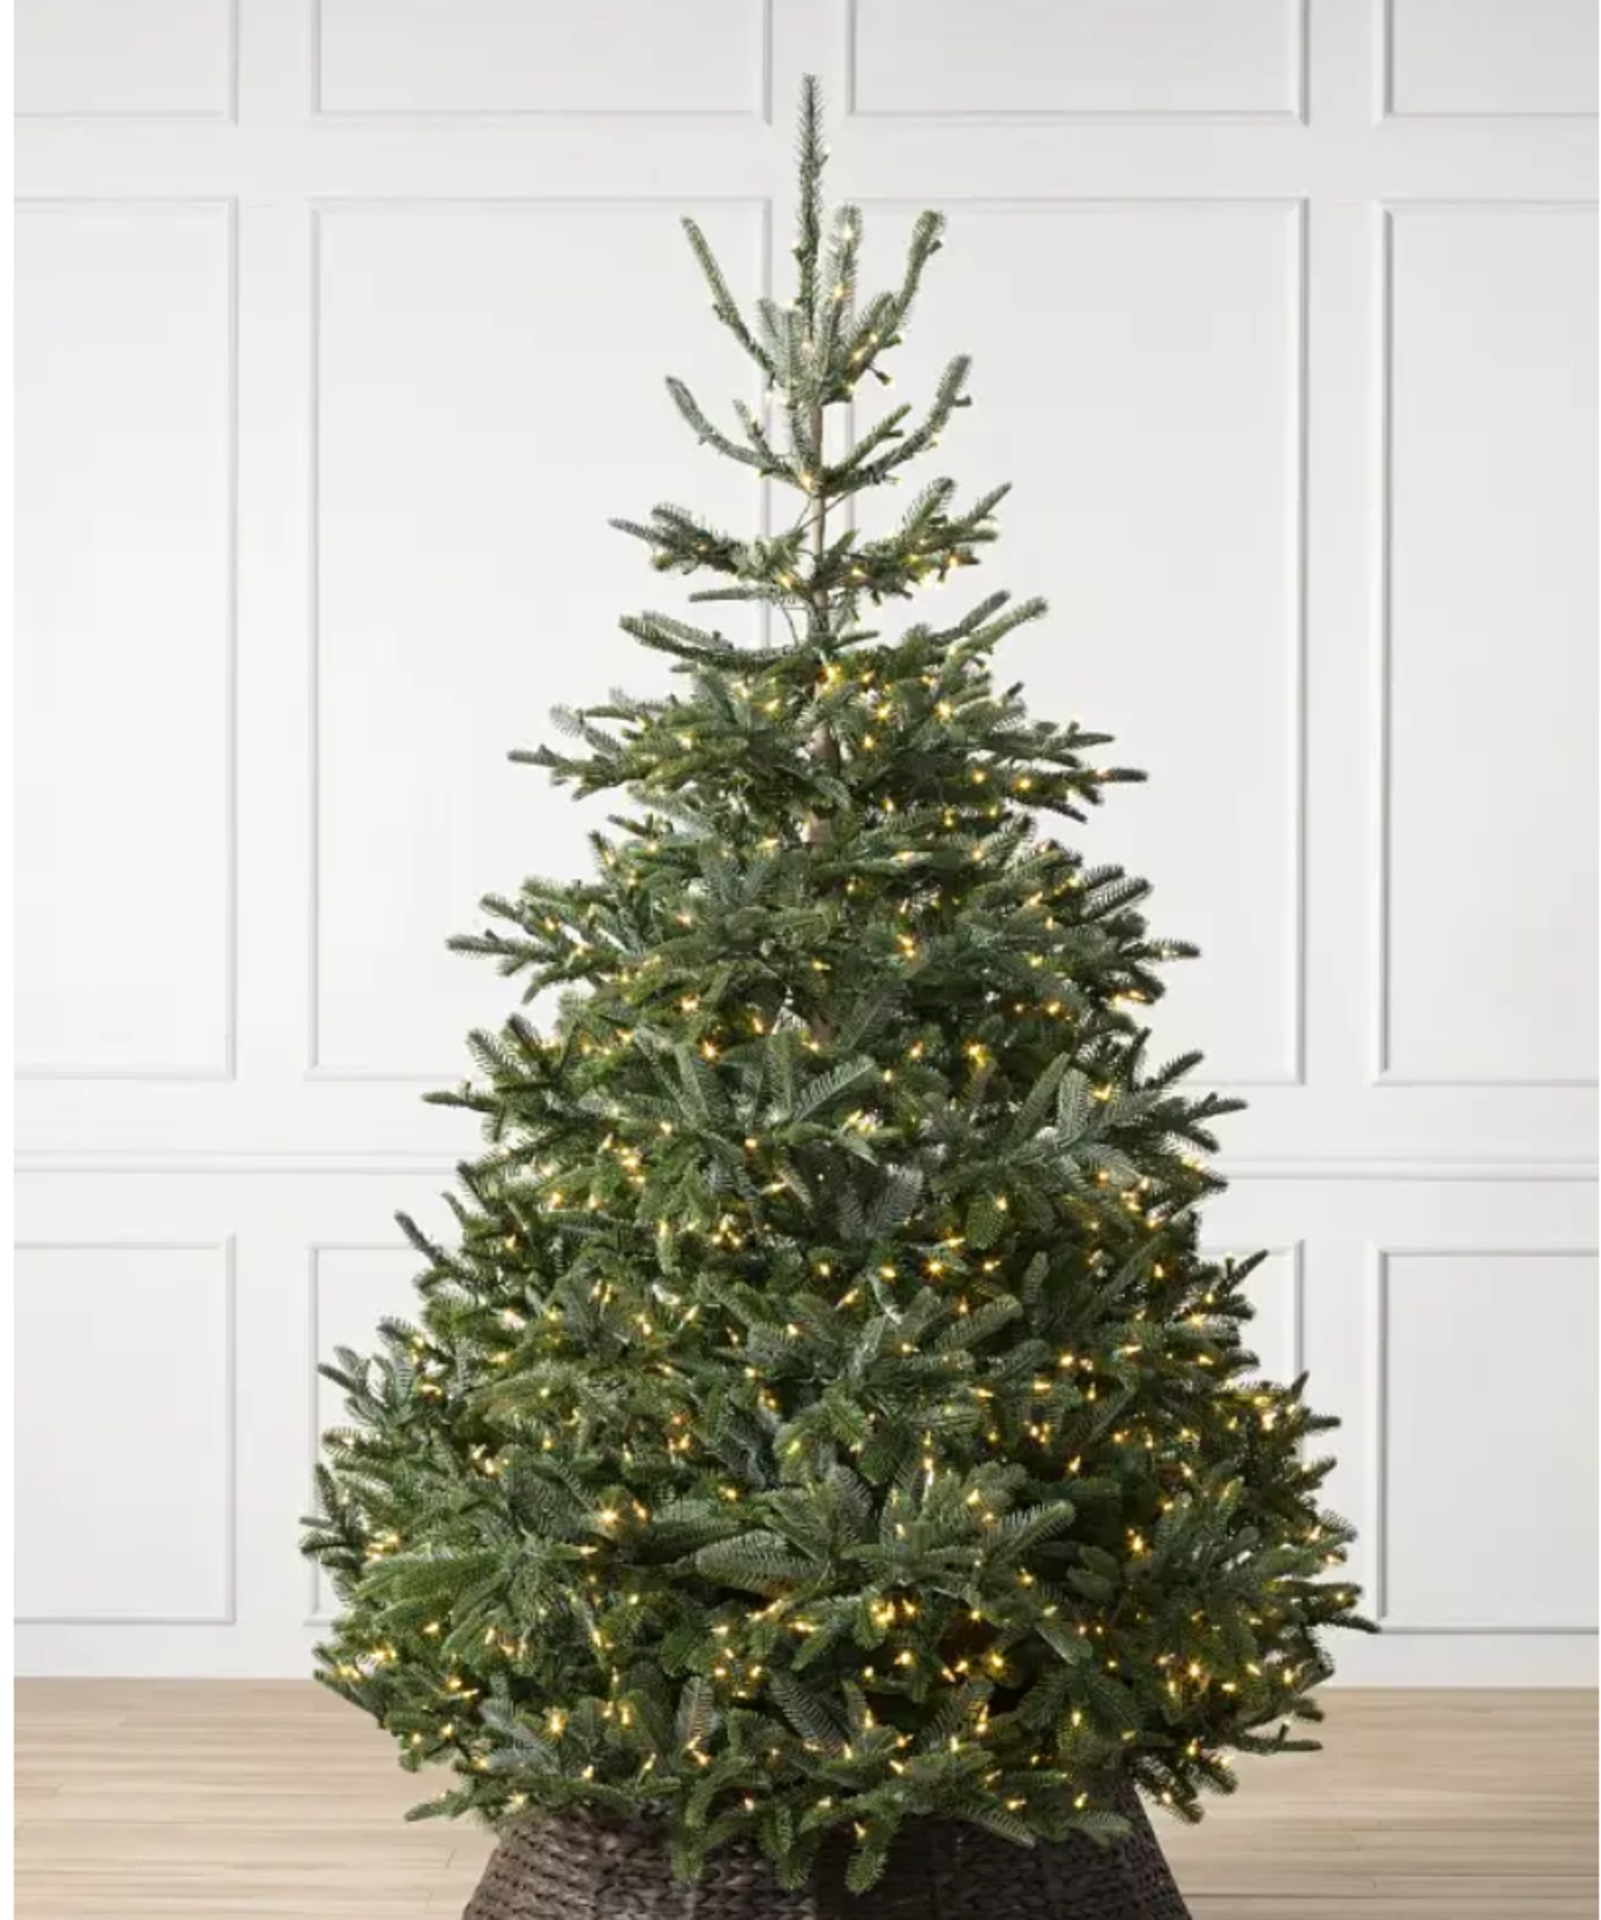 BH (The worlds leading Christmas Trees) BH Nordmann Fir 8ft with LED Clear Lights. RRP £1,199.00.